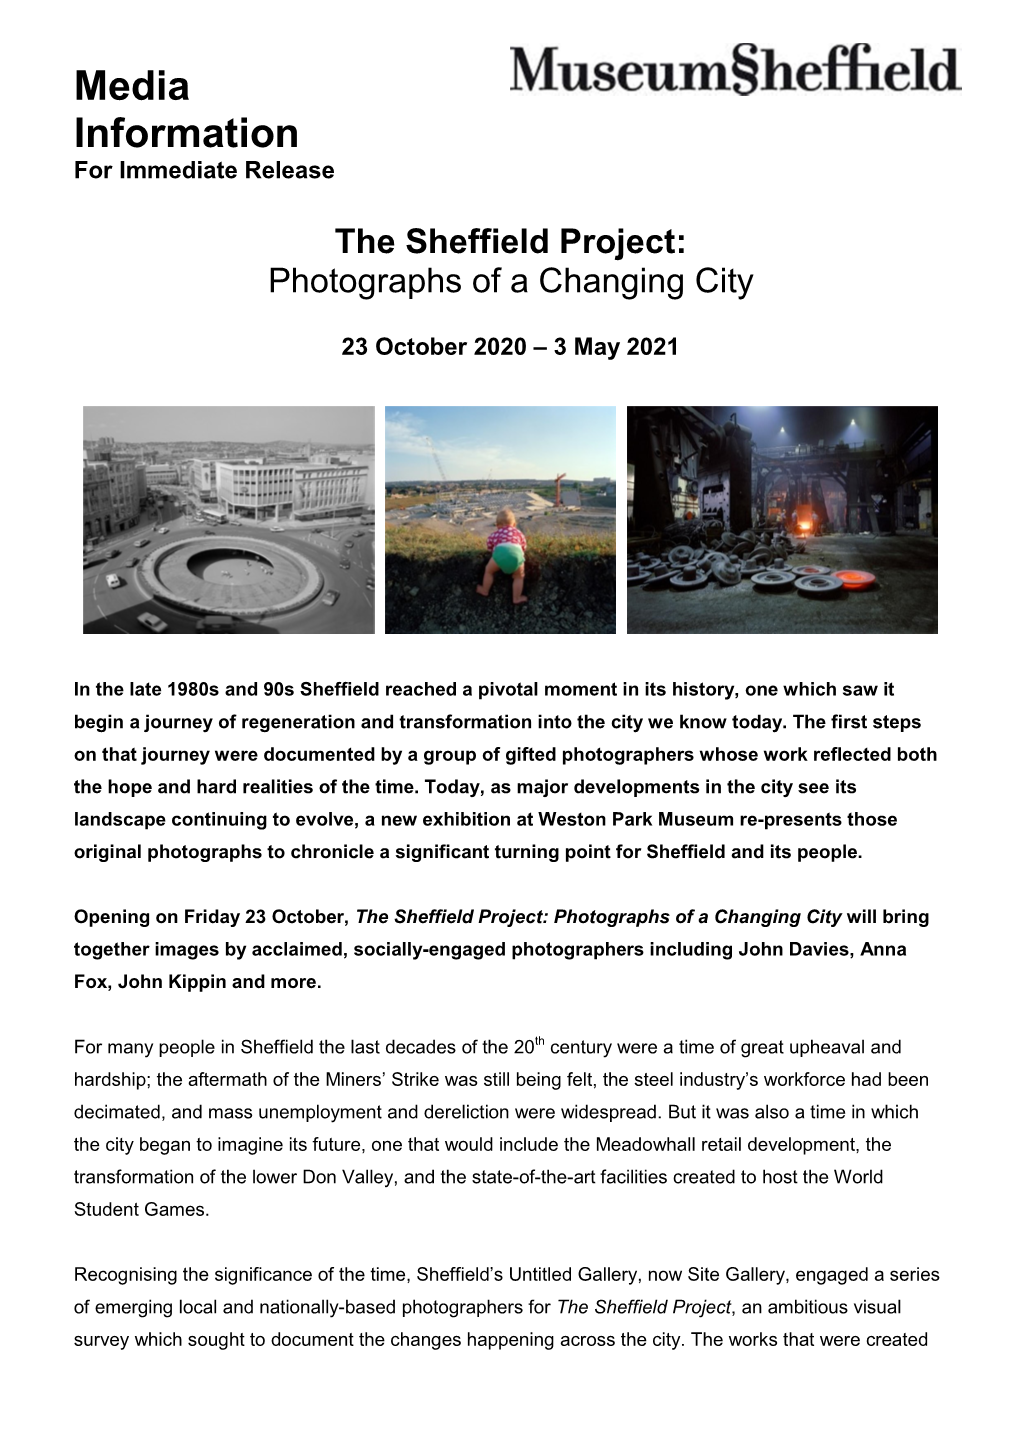 The Sheffield Project: Photographs of a Changing City